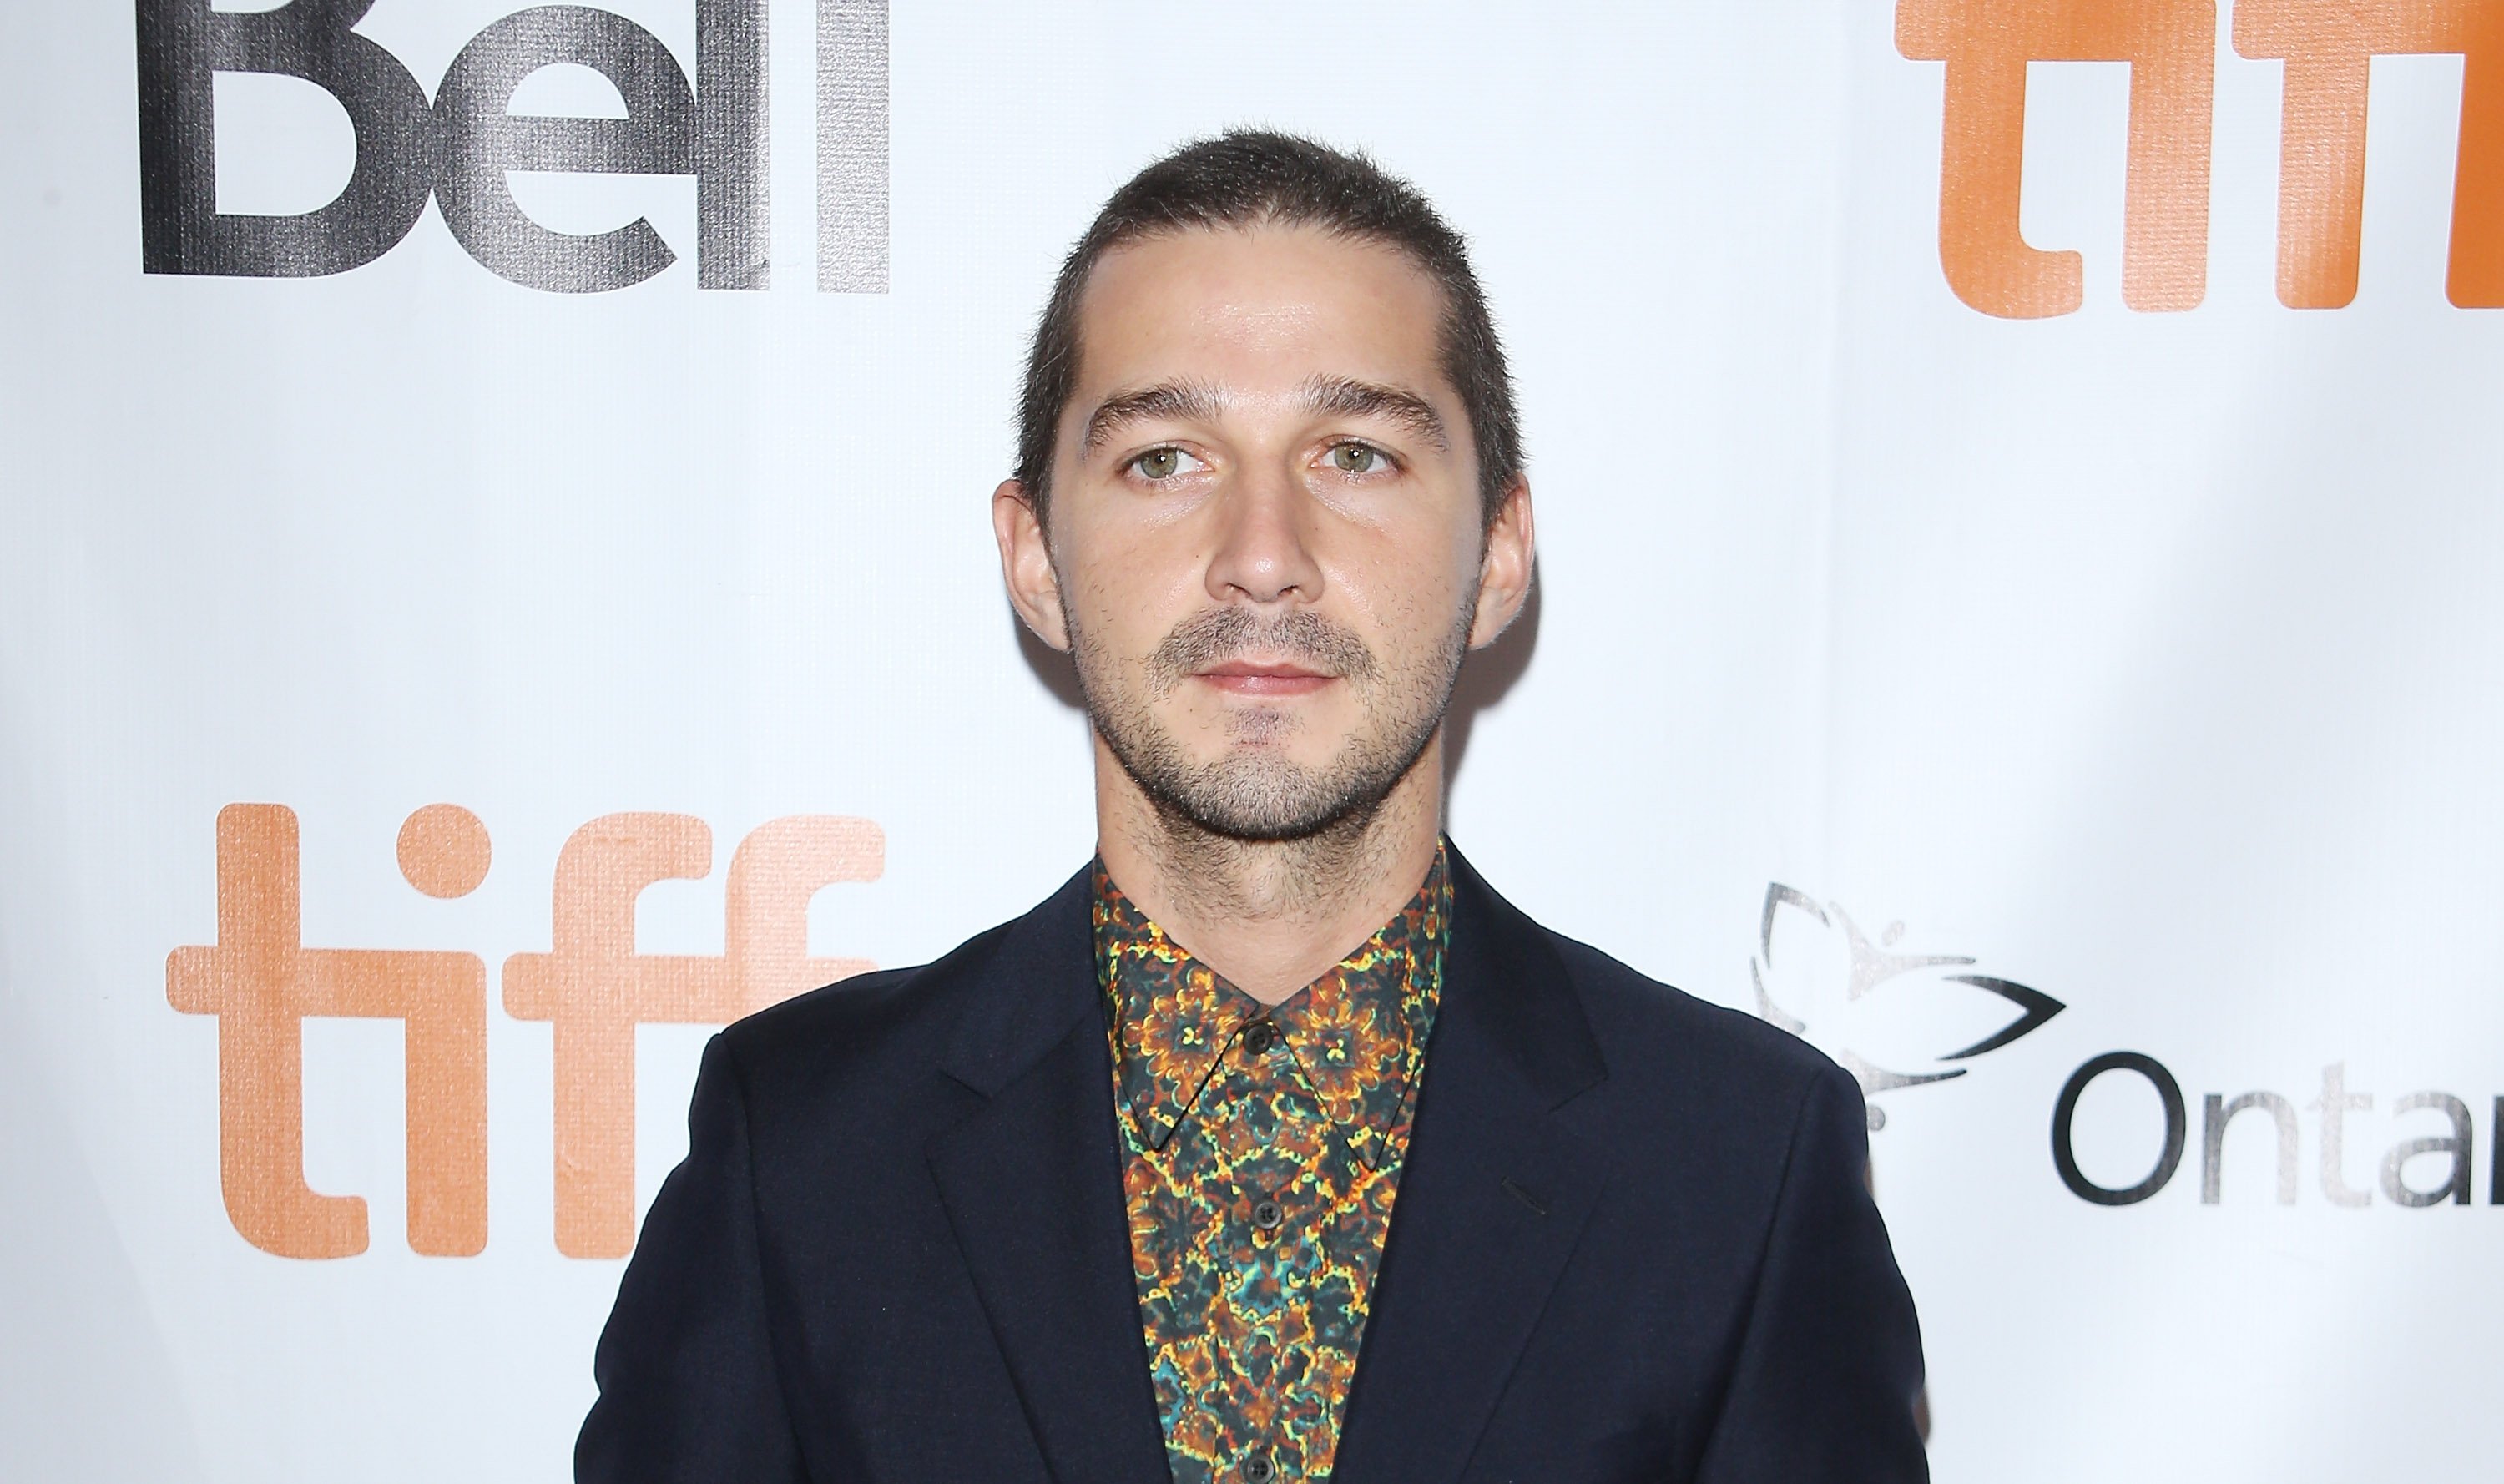 Shia LaBeouf at the “Borg/McEnroe” premiere on September 7, 2017 in Toronto.| Source: Getty Images